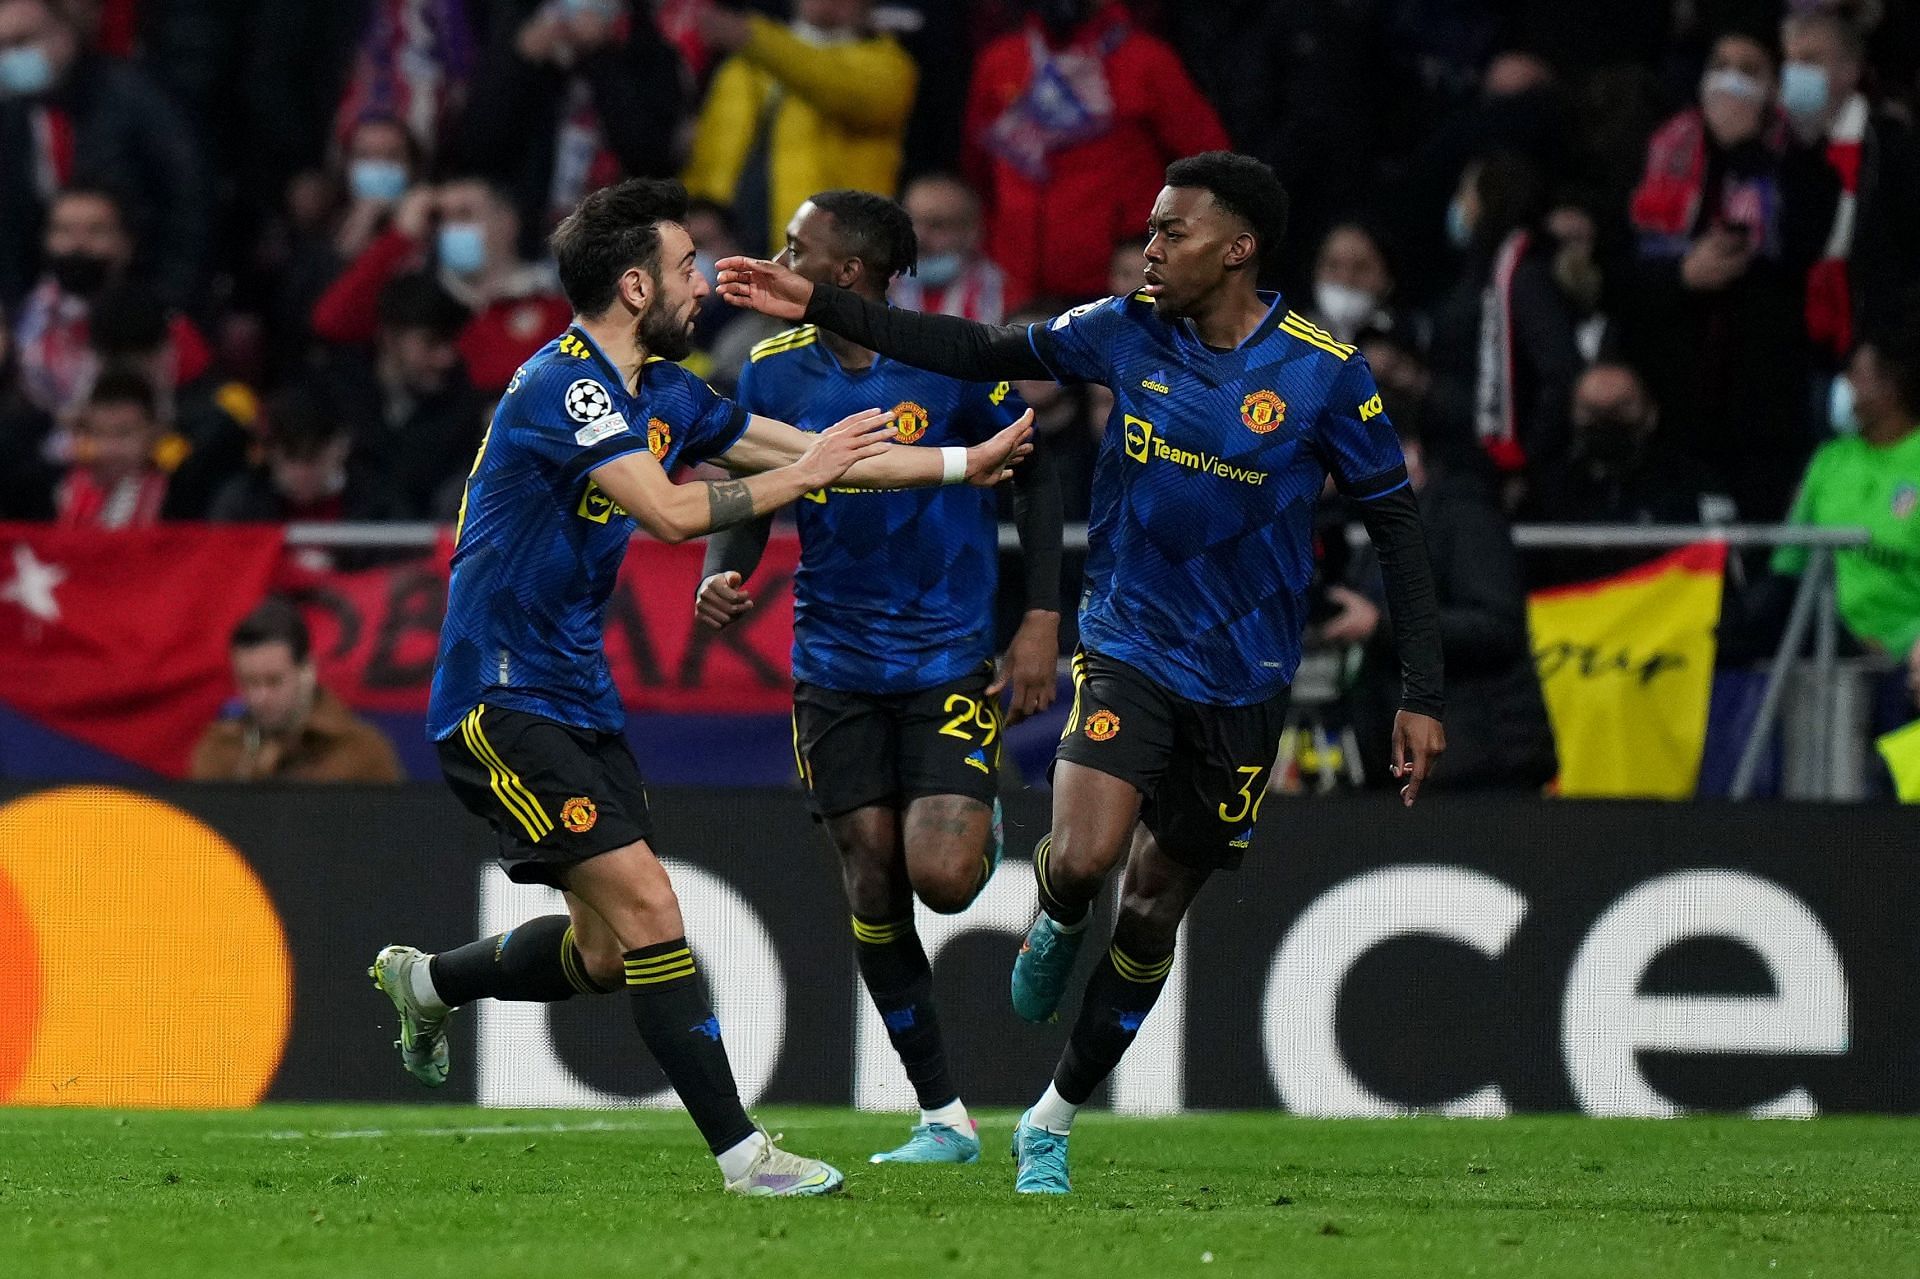 Manchester United lucky to snatch draw against Atletico Madrid after disastrous outing